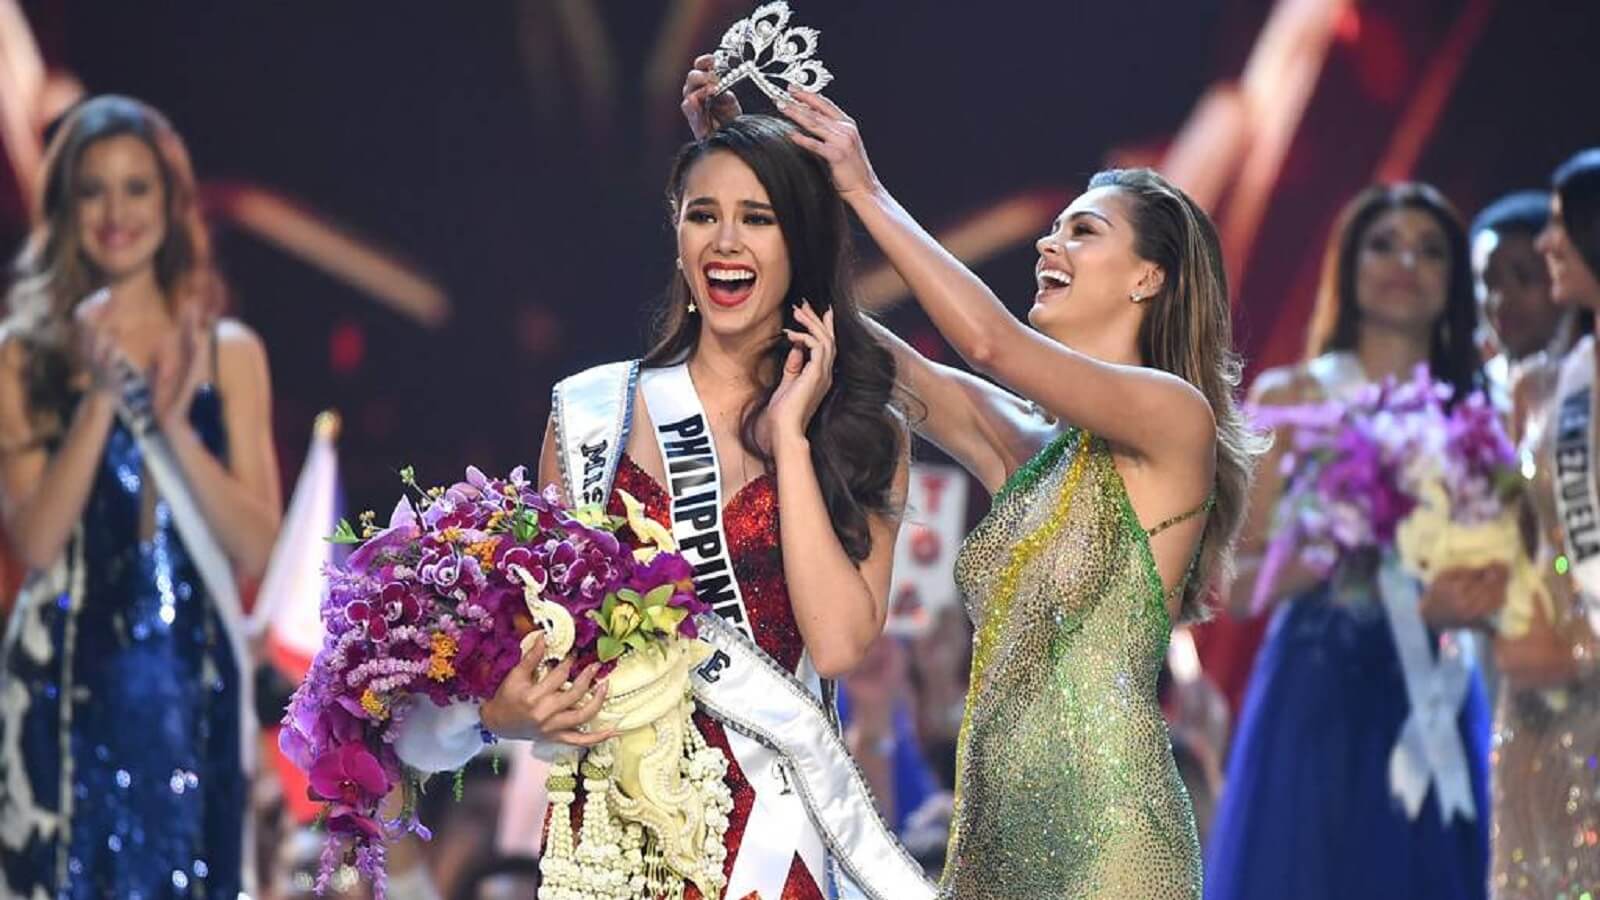 Miss Universe 2018 Catriona Grey, Philippines Contestant loves to travel